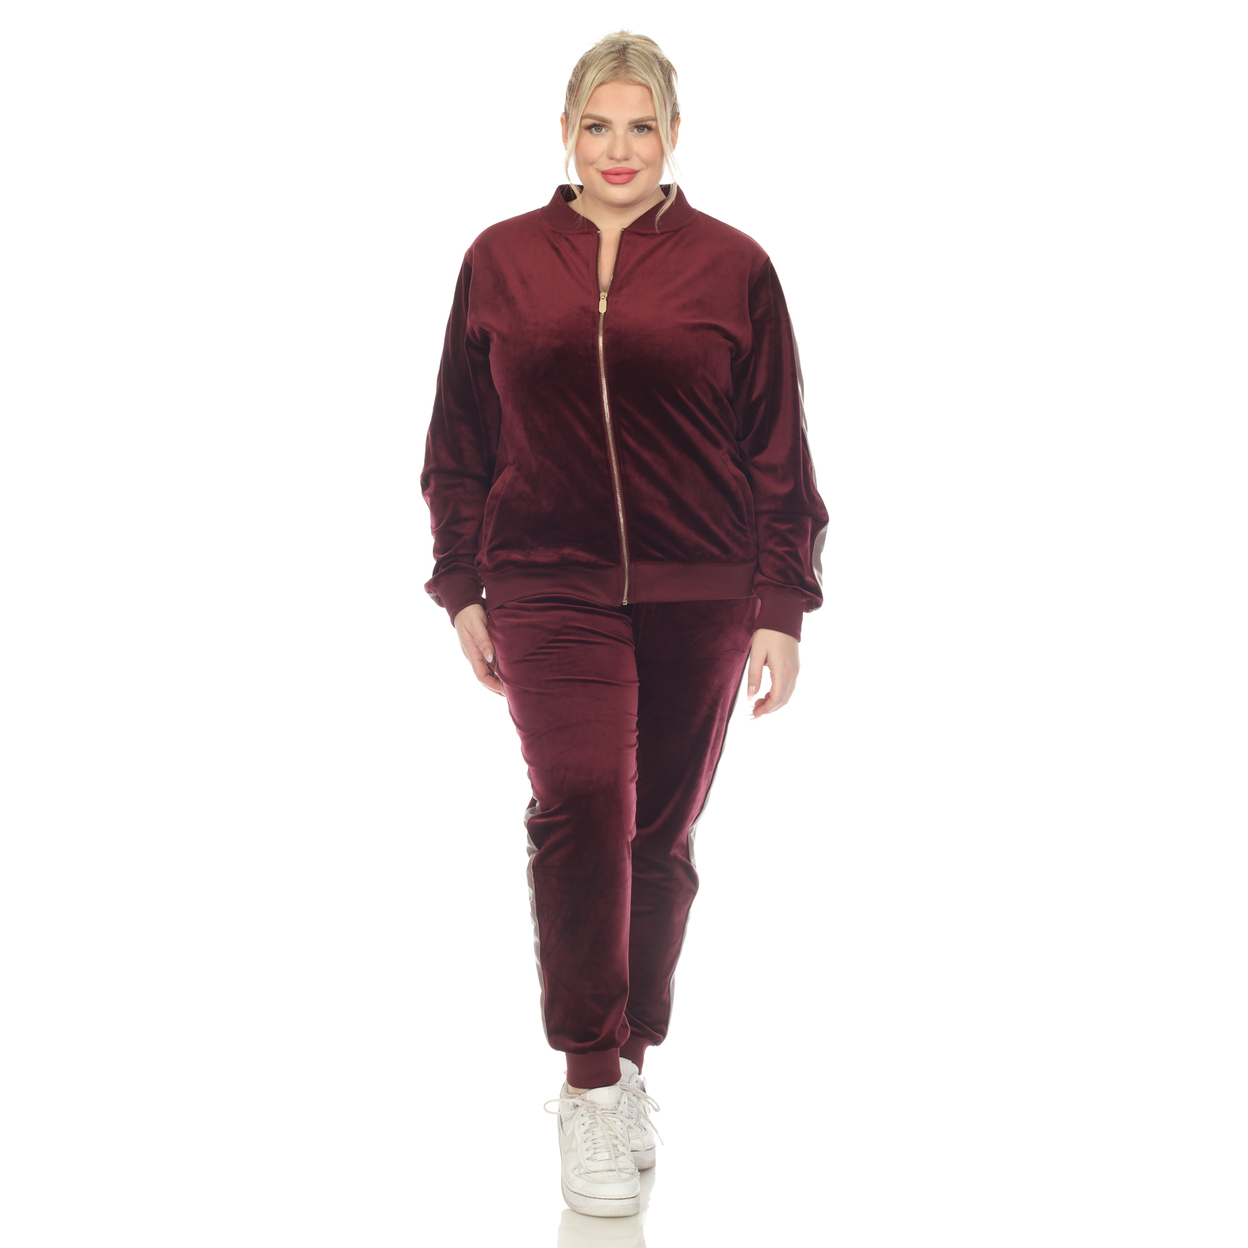 White Mark Women's 2-Piece Velour Tracksuit Set With Faux Leather Stripe - Burgundy, 3x